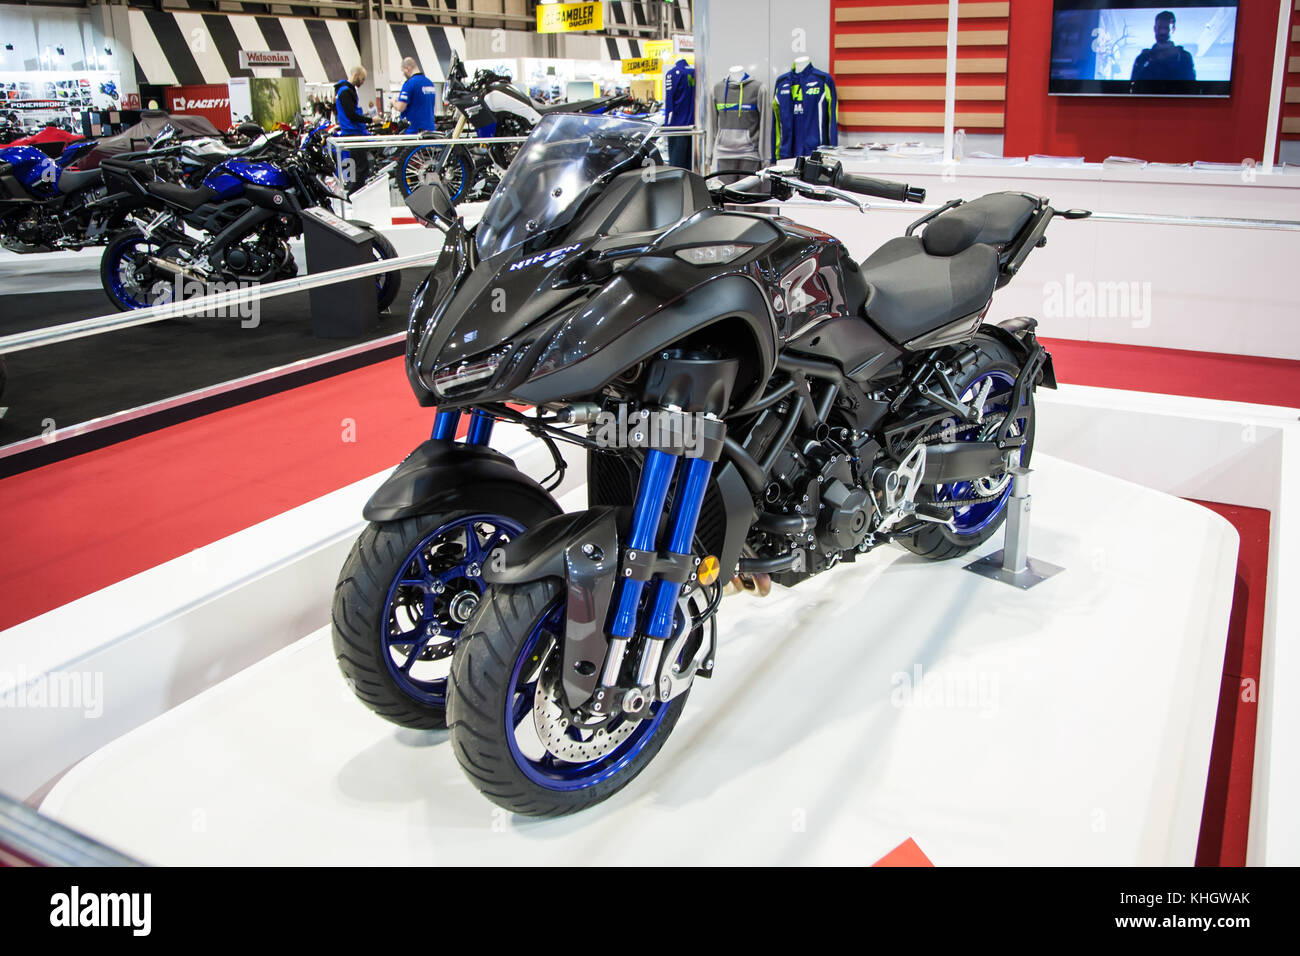 From yamaha stock photography and images - Alamy